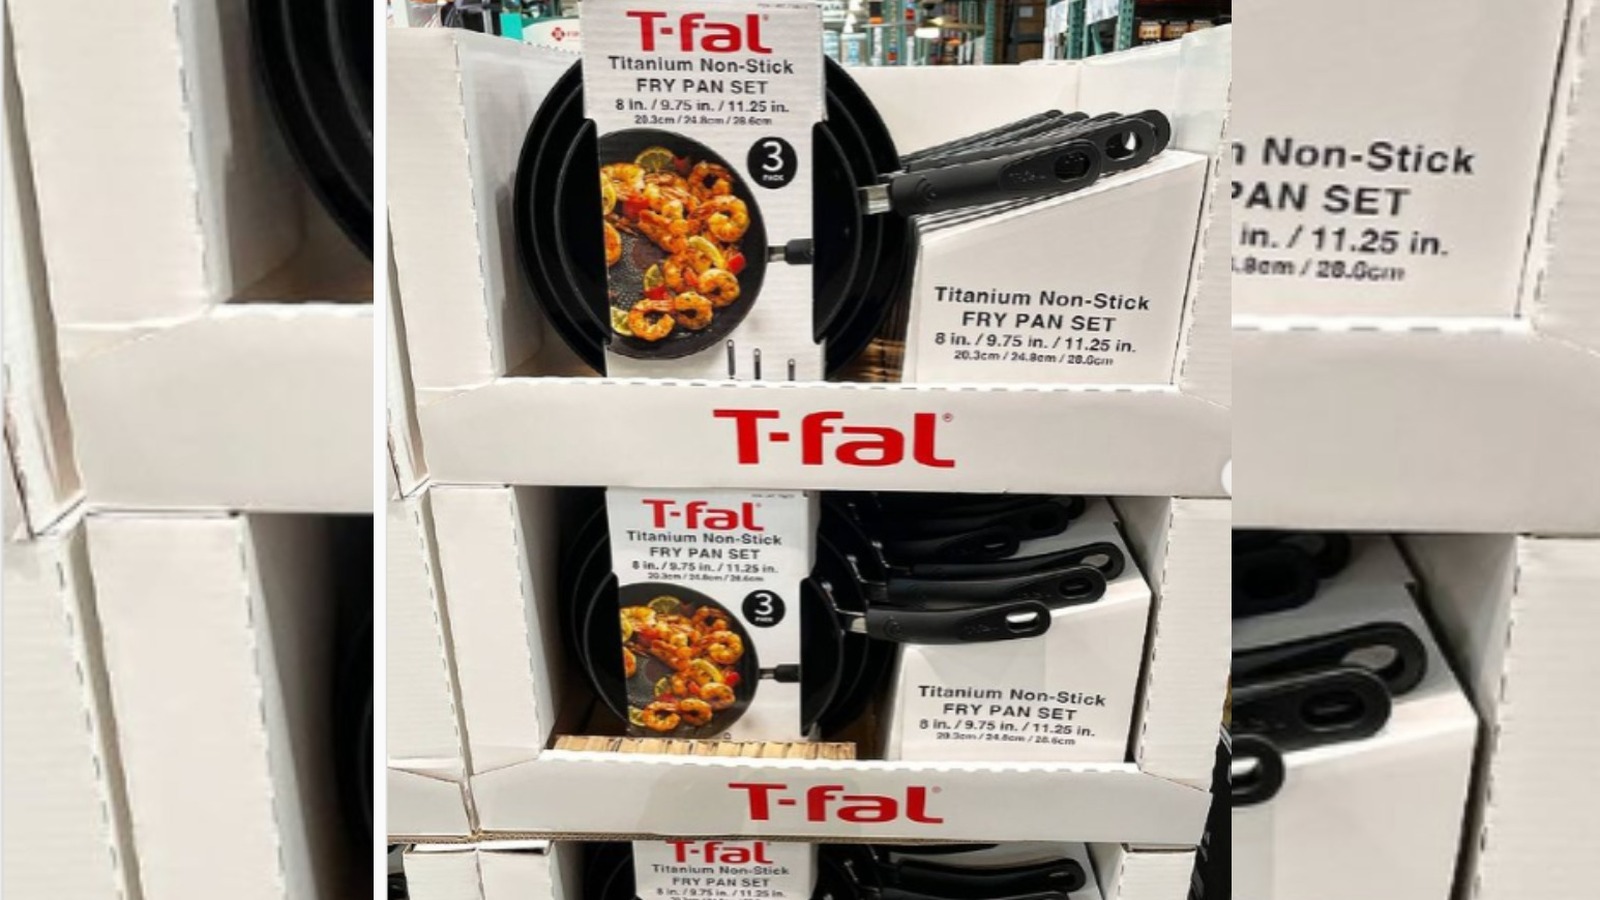 https://www.mashed.com/img/gallery/this-frying-pan-set-at-costco-is-a-total-steal/l-intro-1620055271.jpg